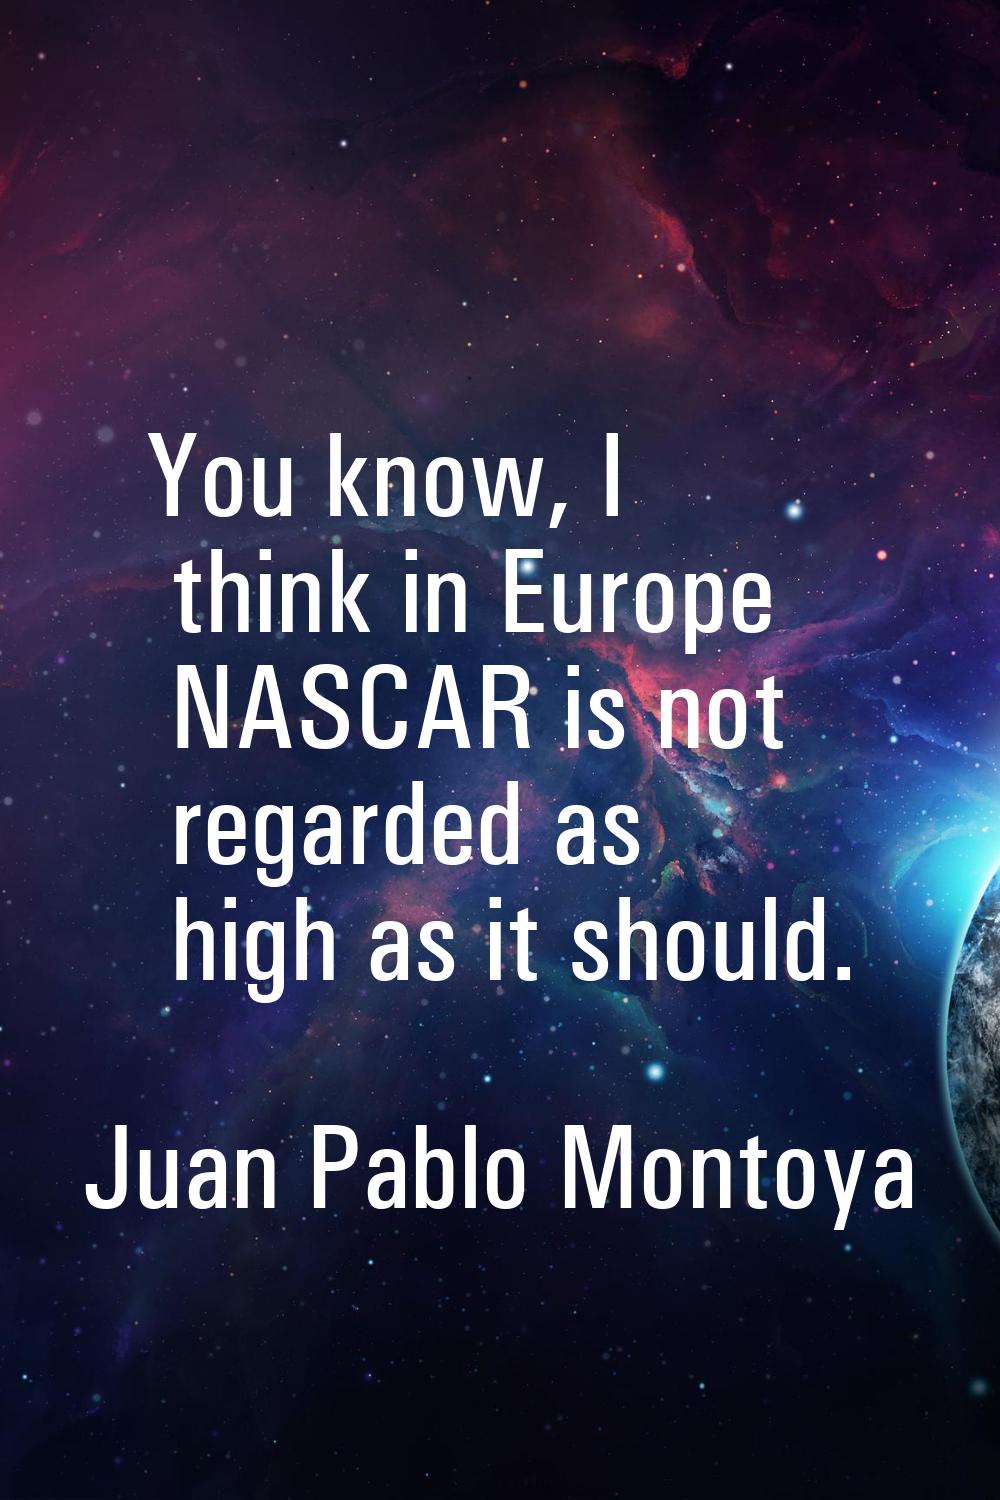 You know, I think in Europe NASCAR is not regarded as high as it should.